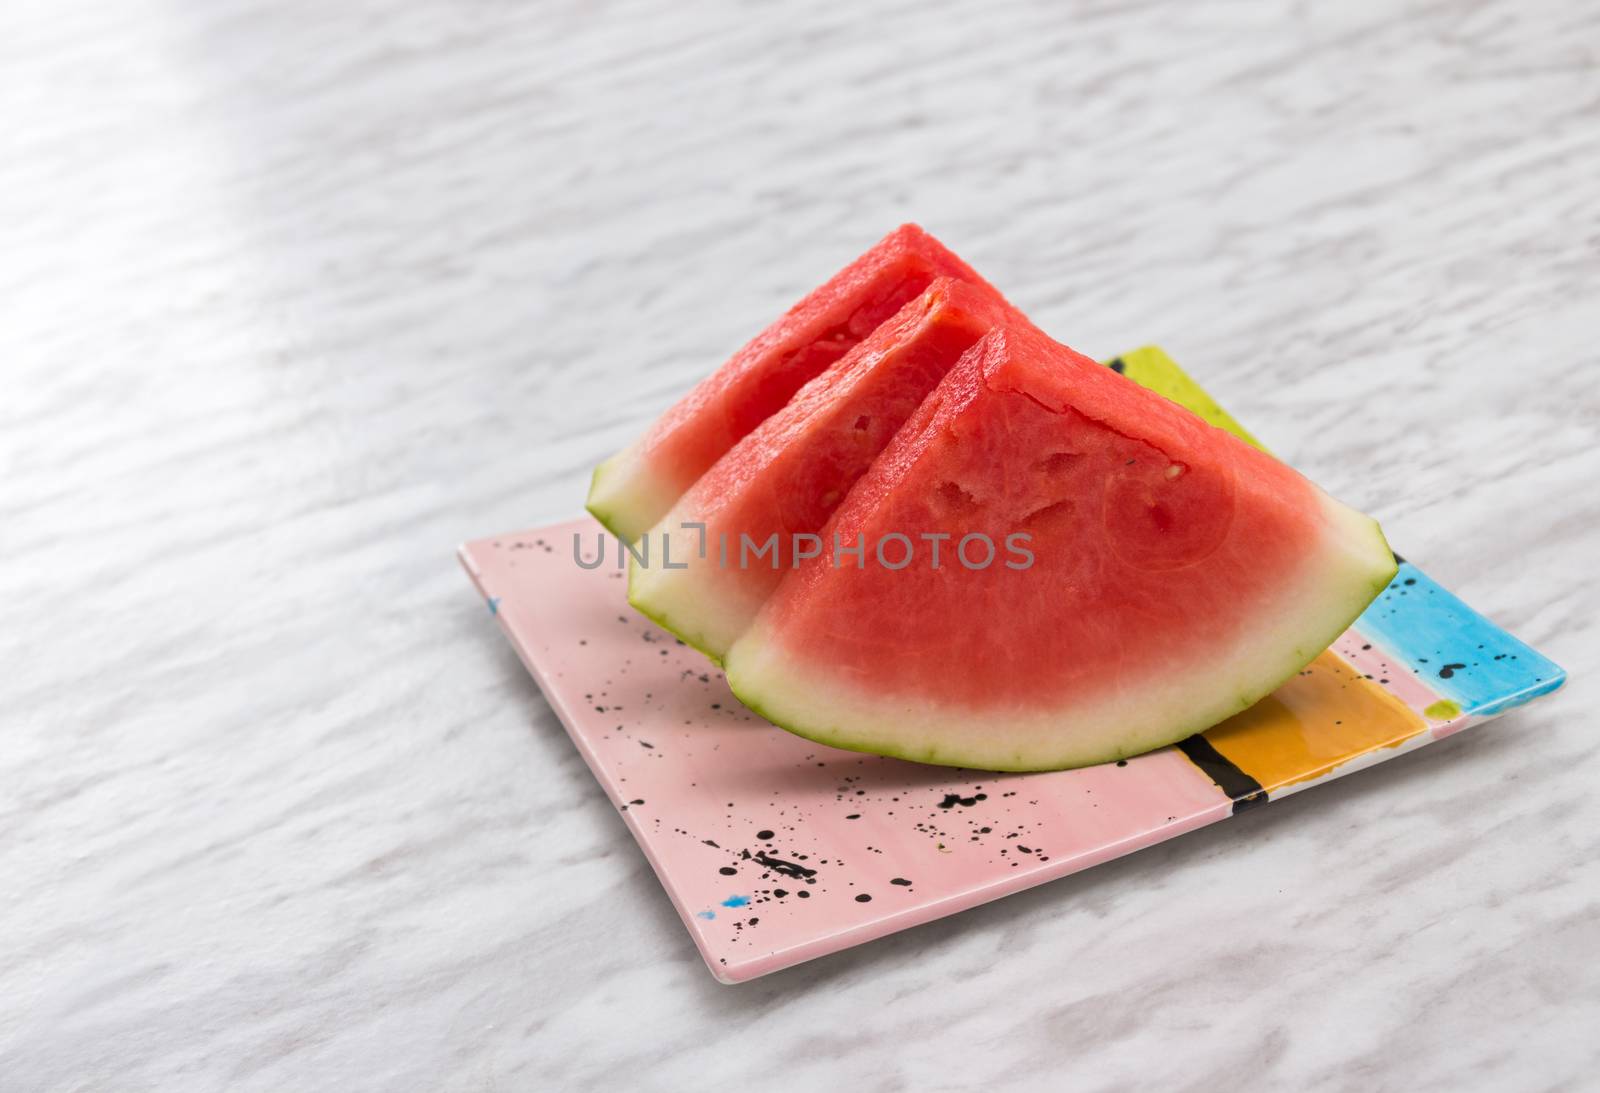 Slices of tasty watermelon on a ceramic plate, on marble background.